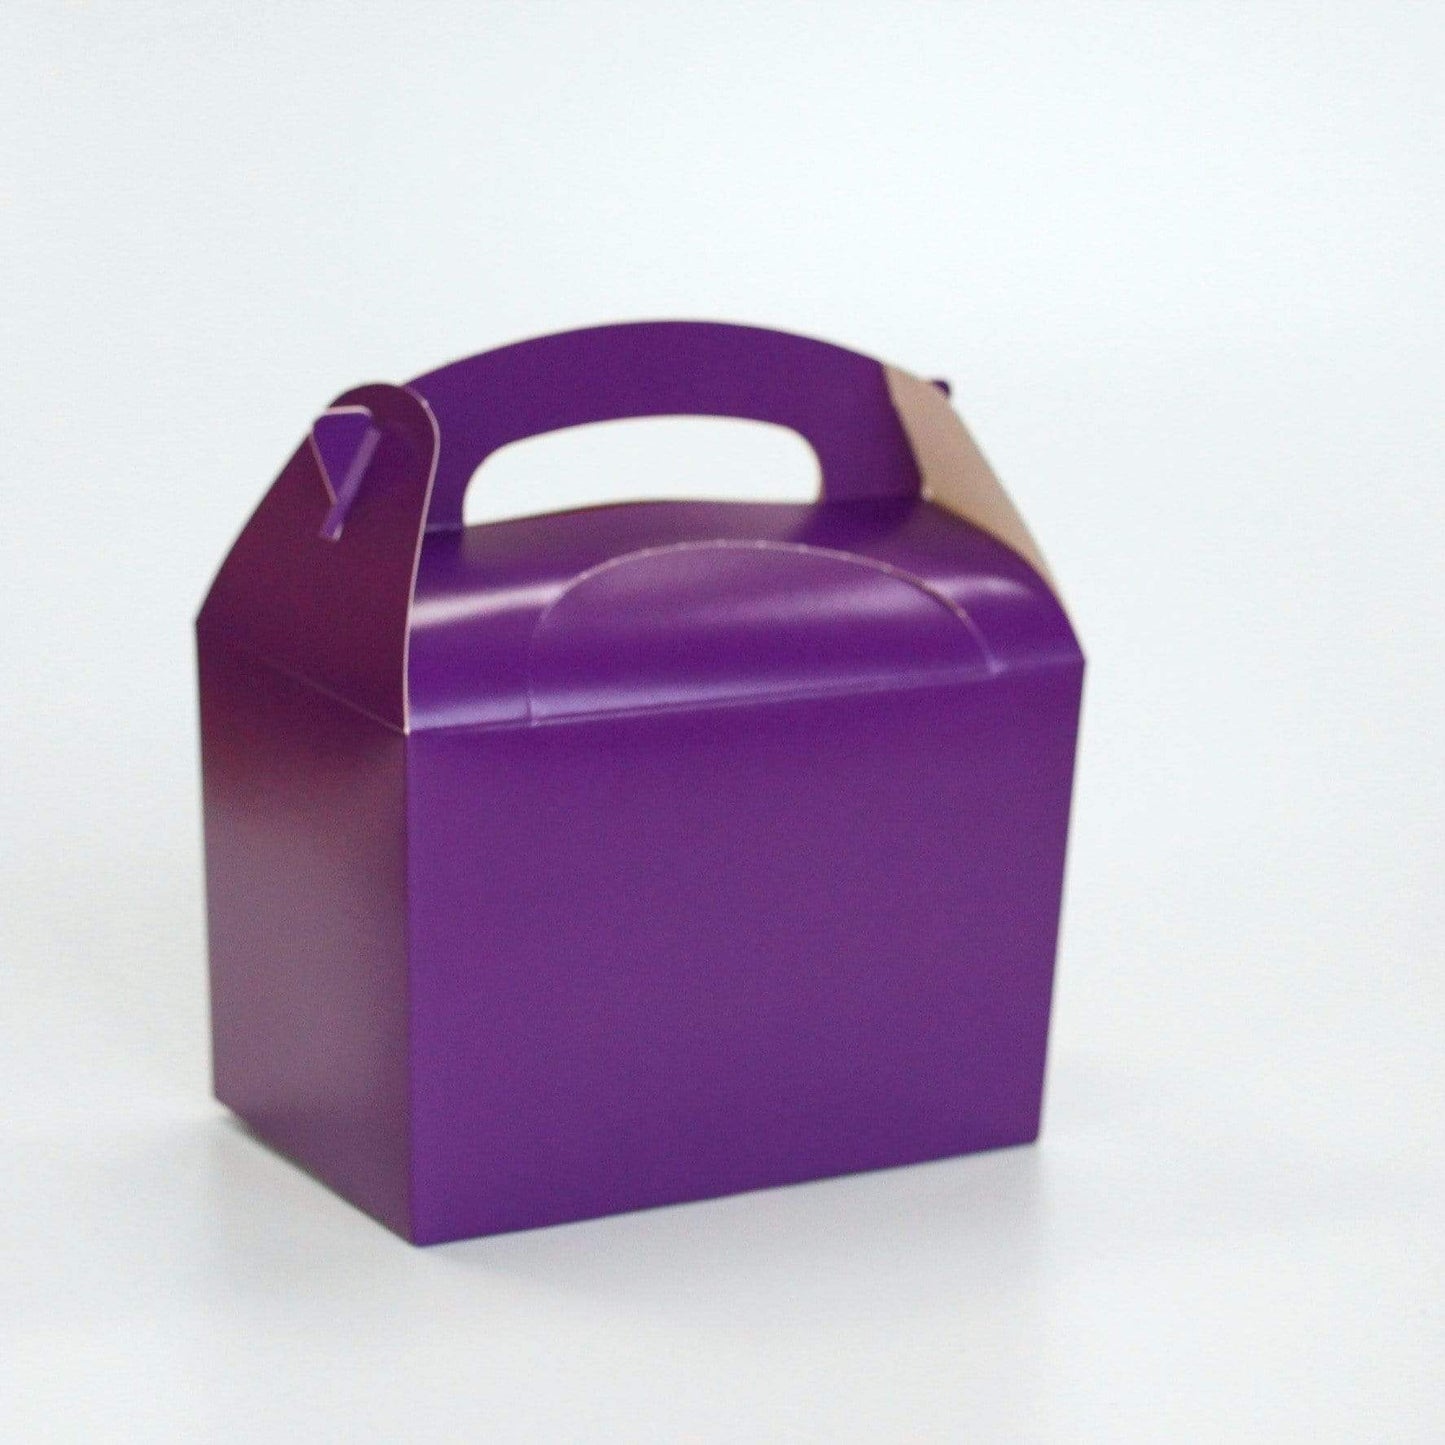 Purple Party Lunch Boxes | Party Boxes & Party Food Ideas Online UK Oaktree